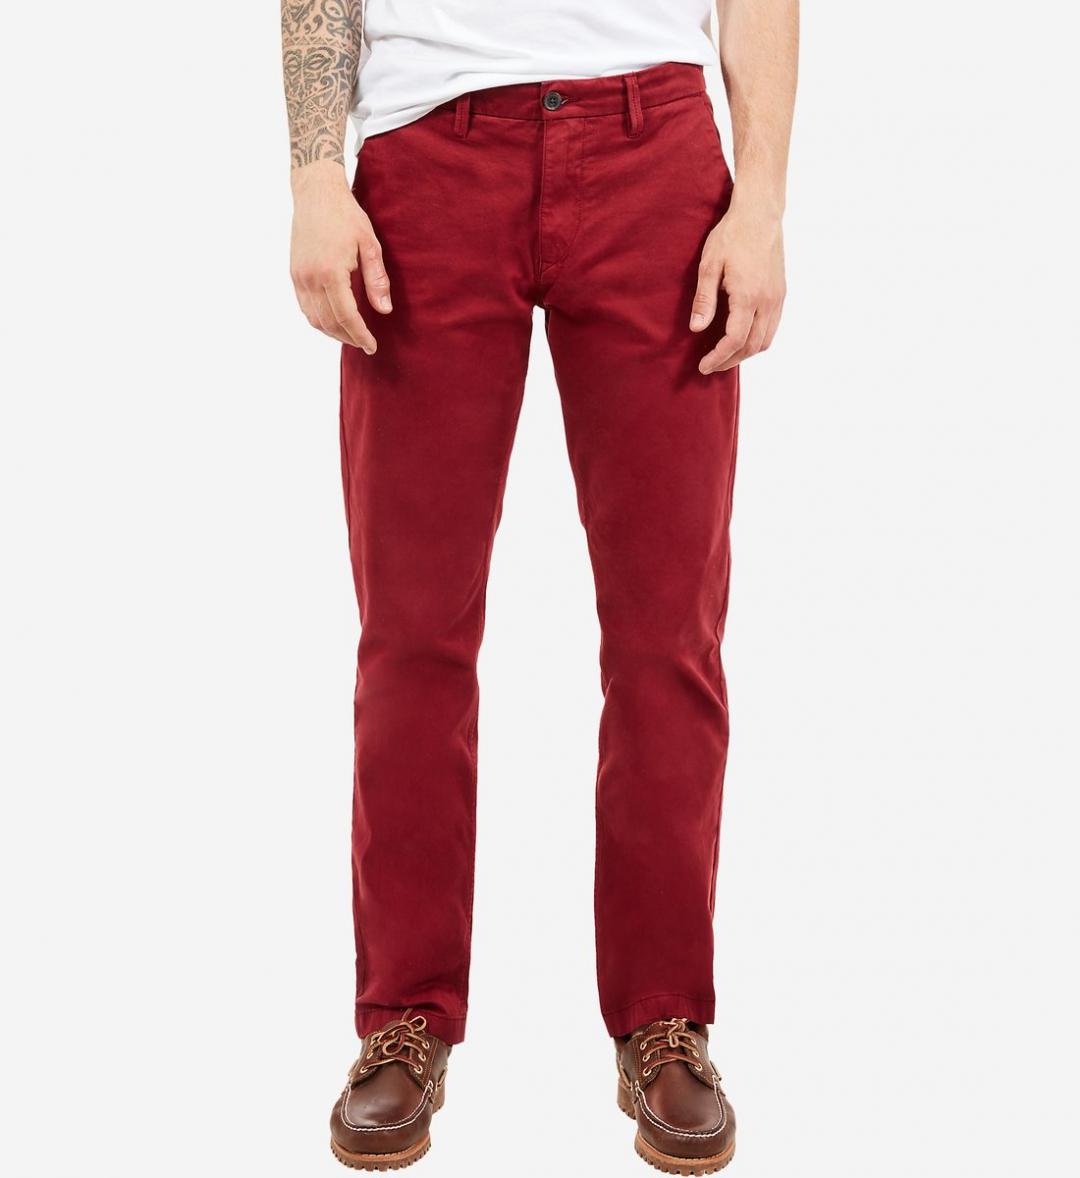 chino rouge homme avec quoi